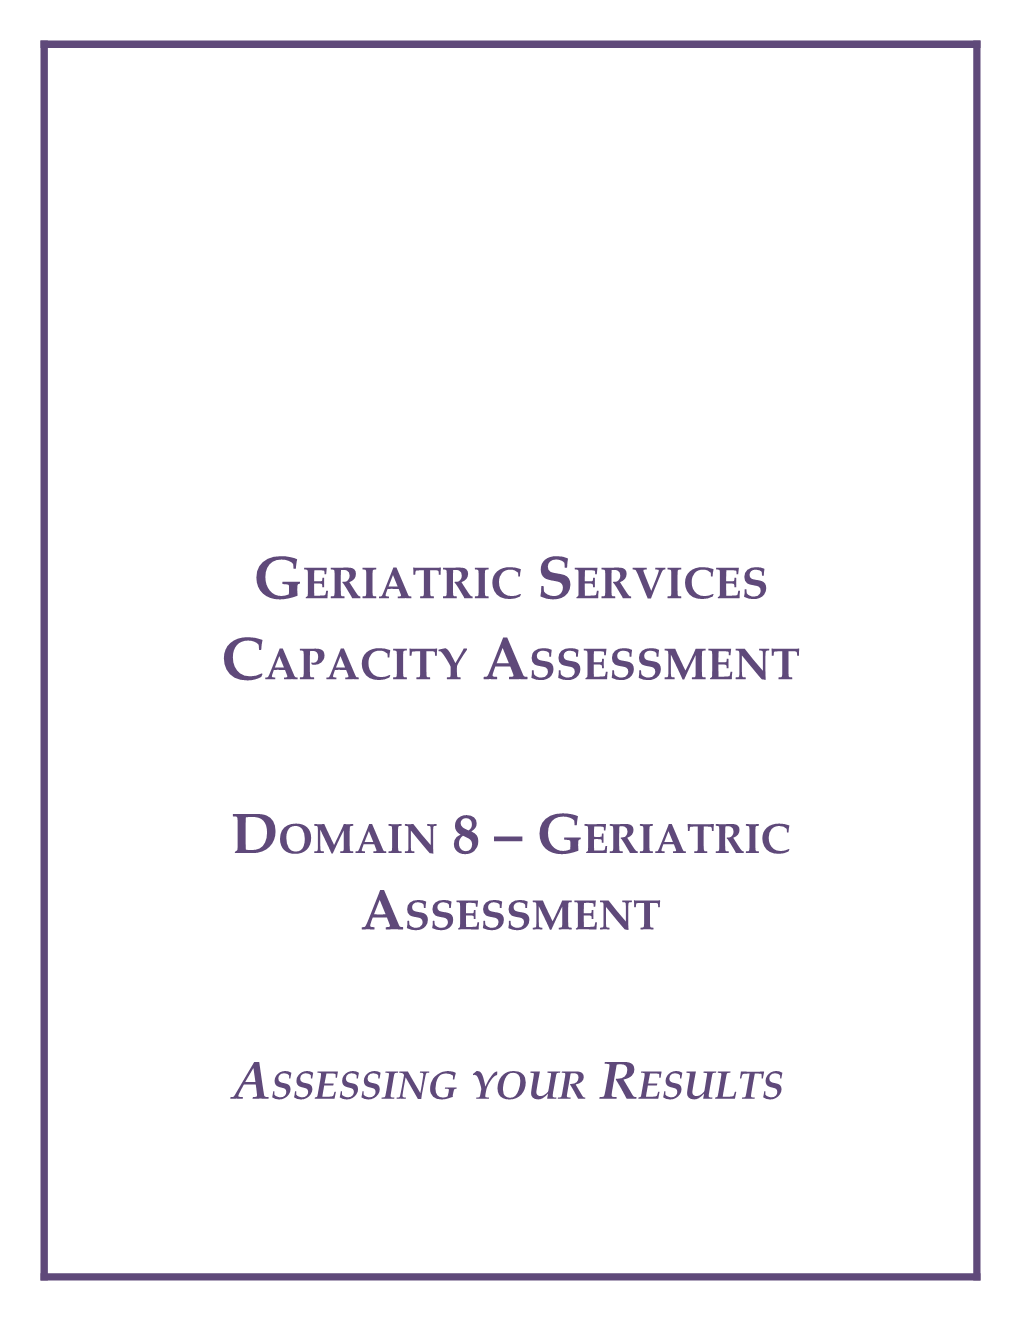 Care for Geriatric Consumers and Service Capacity:A Self-Assessment Tool